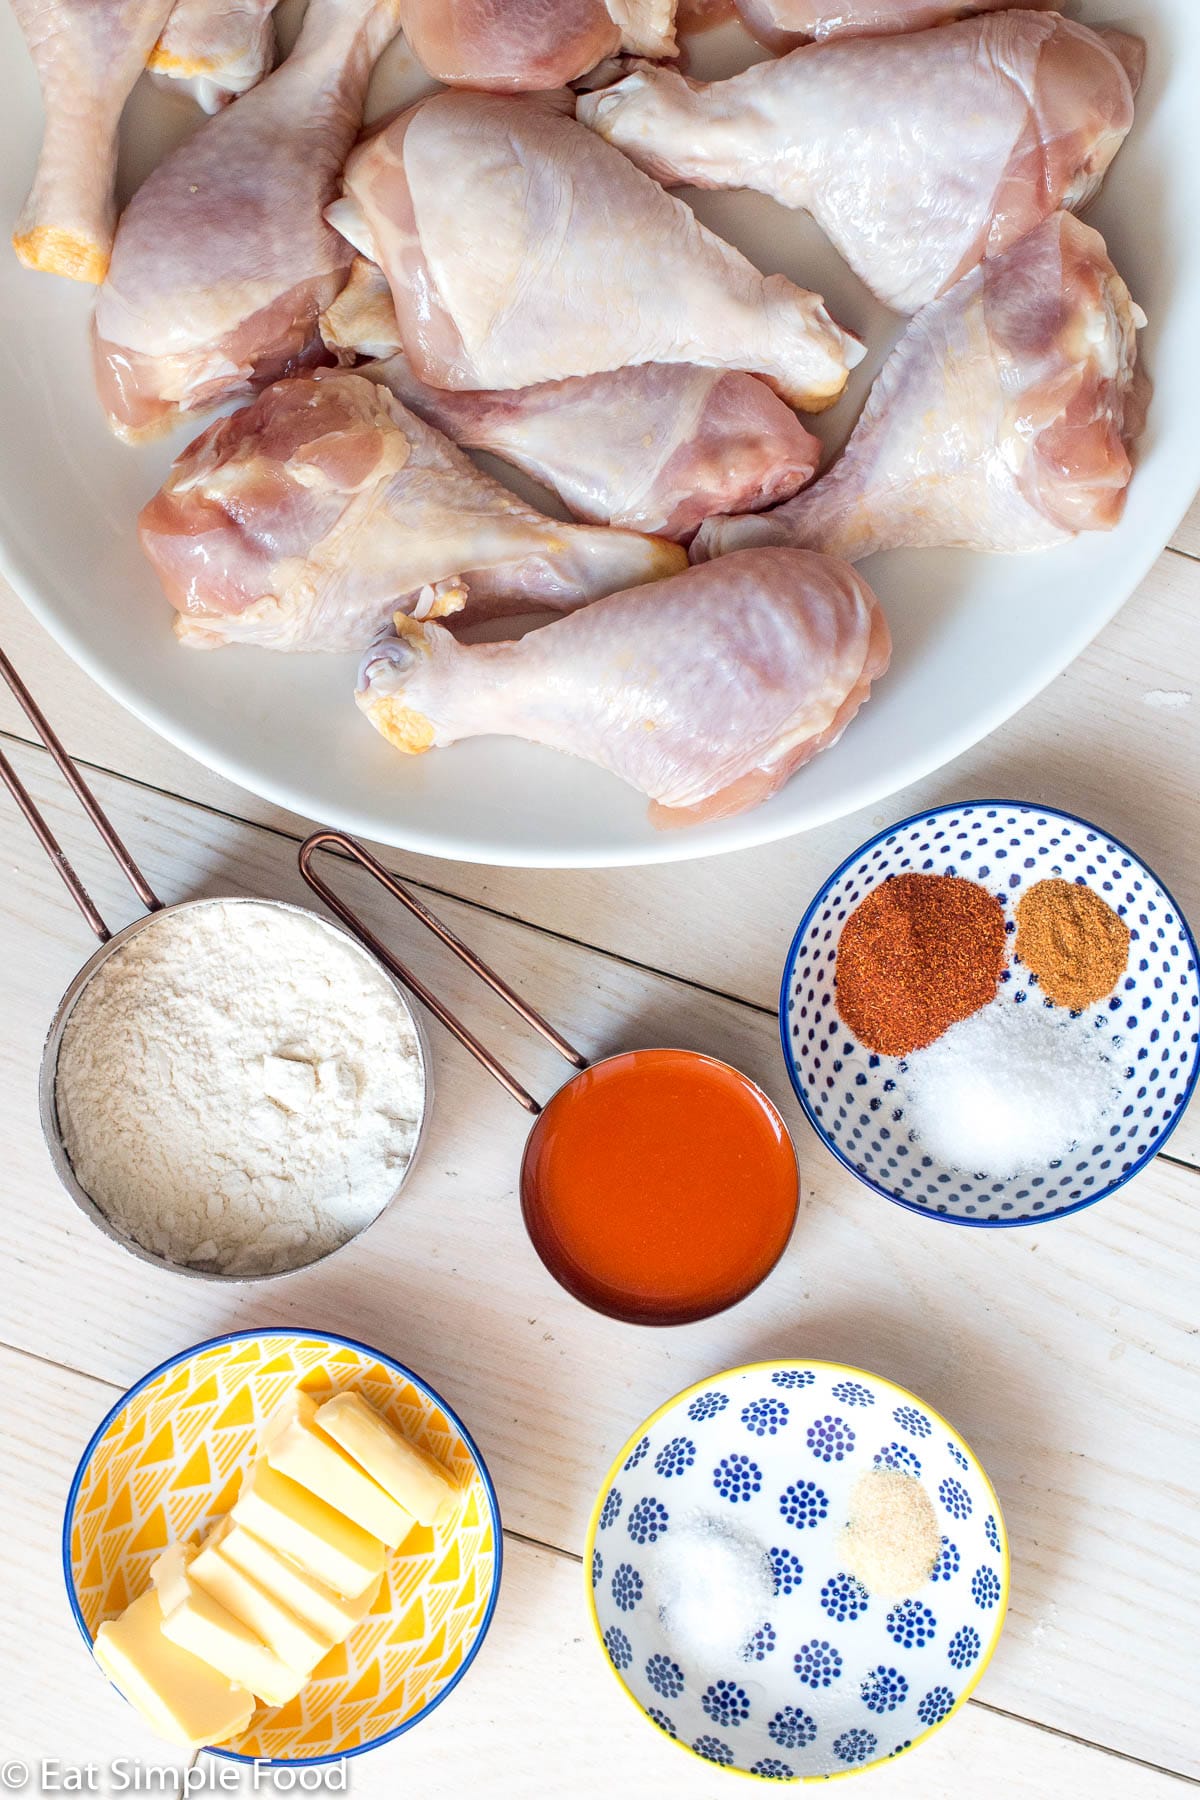 Raw chicken drumsticks on a white plate with hot sauce, butter, flour, and paprika in containers around it. Top view.